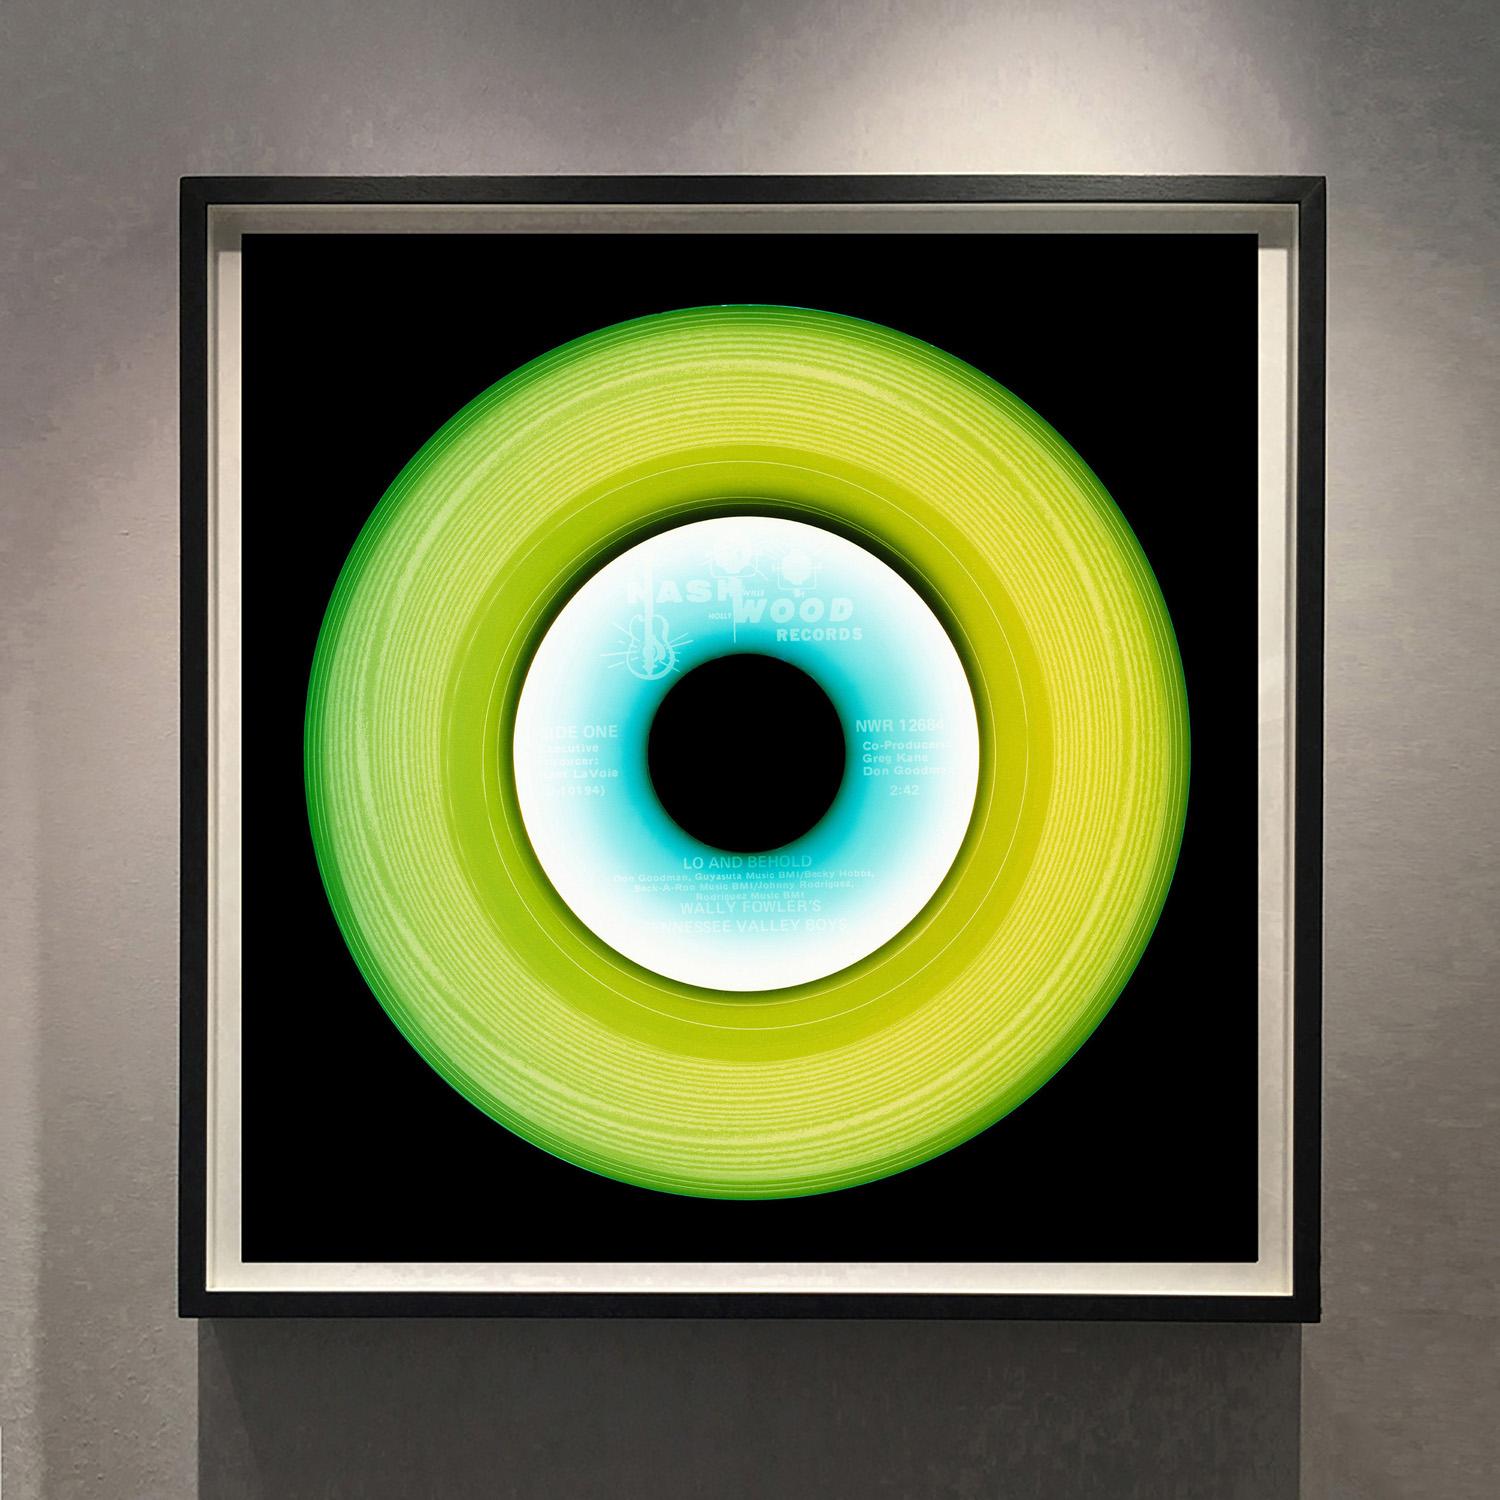 Vinyl Collection 'Side One (Lemon & Lime)' - Pop art color photograph - Photograph by Heidler & Heeps